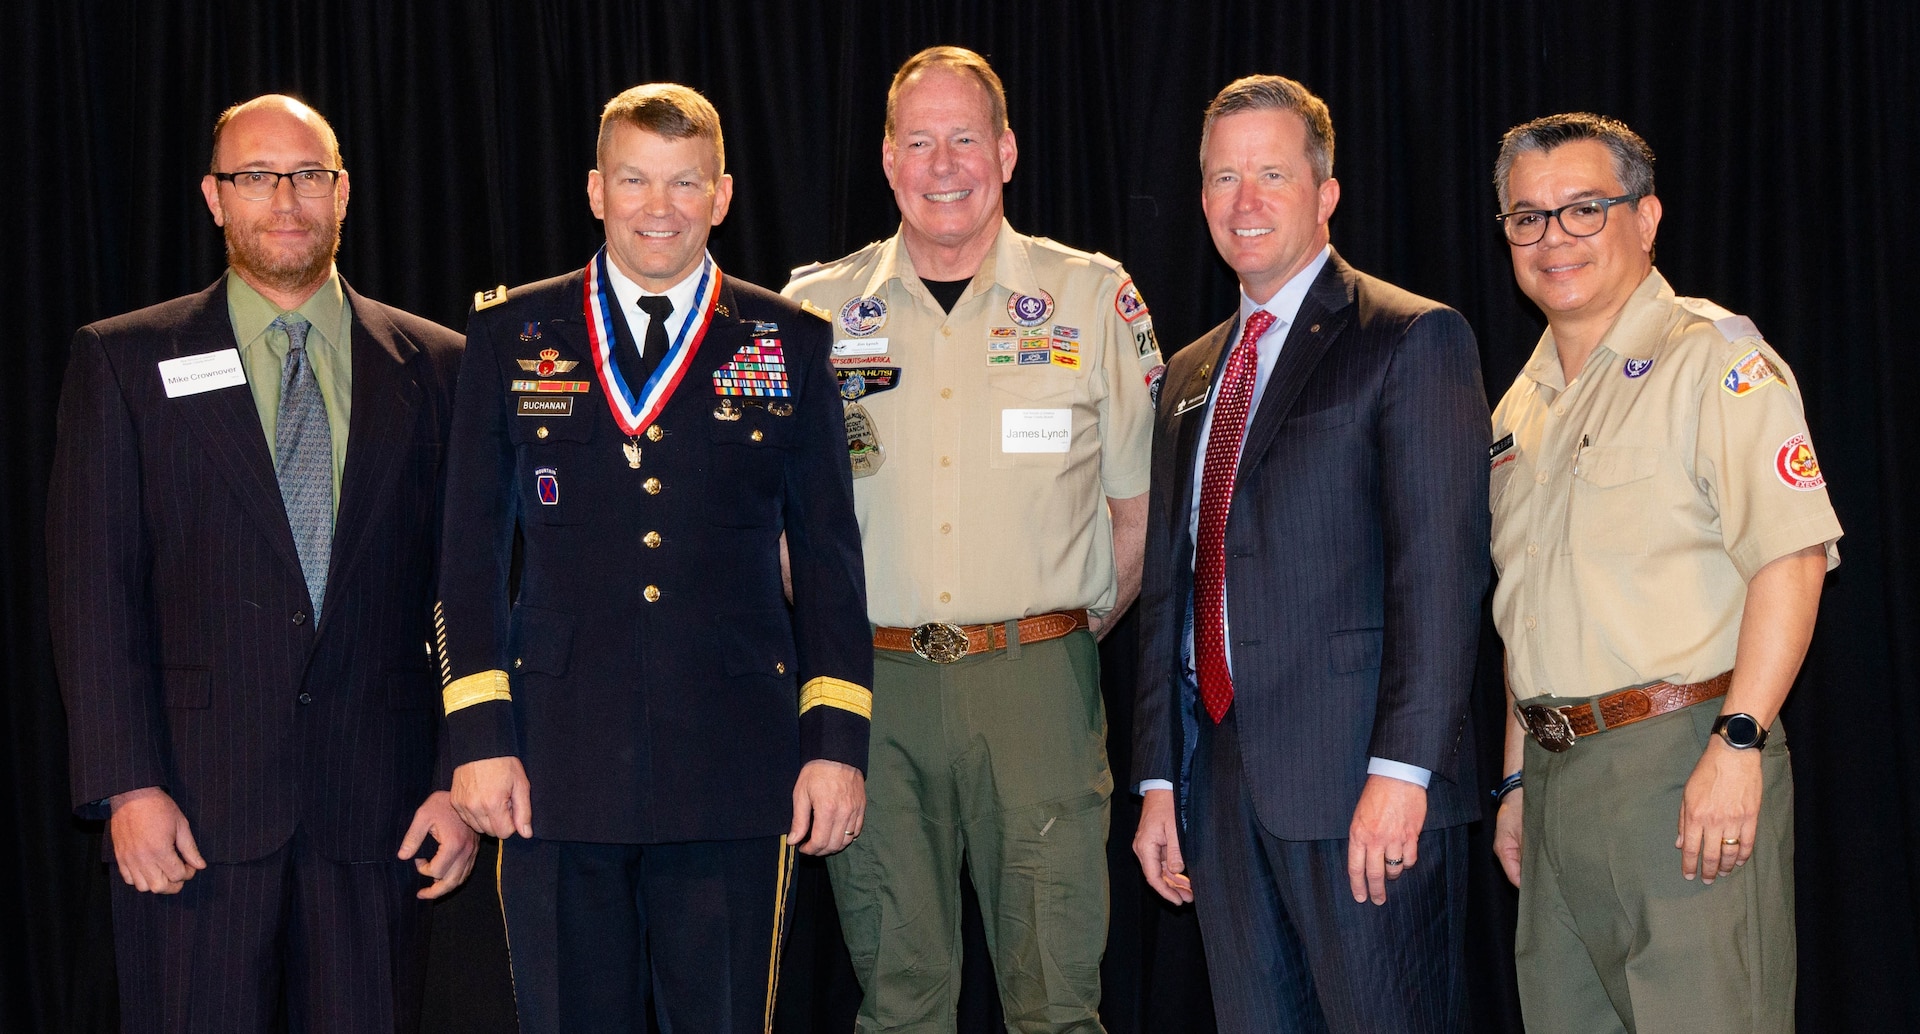 U.S. Army North Commanding General, Lt. Gen. Jeffrey Buchanan (second from left) was presented the Distinguished Eagle Scout Award at the Boy Scouts of America, Alamo Area Council Brunch Feb. 13 in San Antonio. Buchanan, who attained the rank of Eagle Scout in 1973, was presented this award for exceptionally distinguished service in his military career and to the community. Only one in every 1,000 Eagle Scouts has been awarded this high honor. Pictured (from left to right) are Mike Crownover, National Eagle Scout Association Chairman; Lt. Gen. Jeffrey Buchanan; Jim Lynch, Alamo Area Council Commissioner; Jim Jeffrey, Alamo Area Council President; and Michael de los Santos, Alamo Area Council Scout Executive.